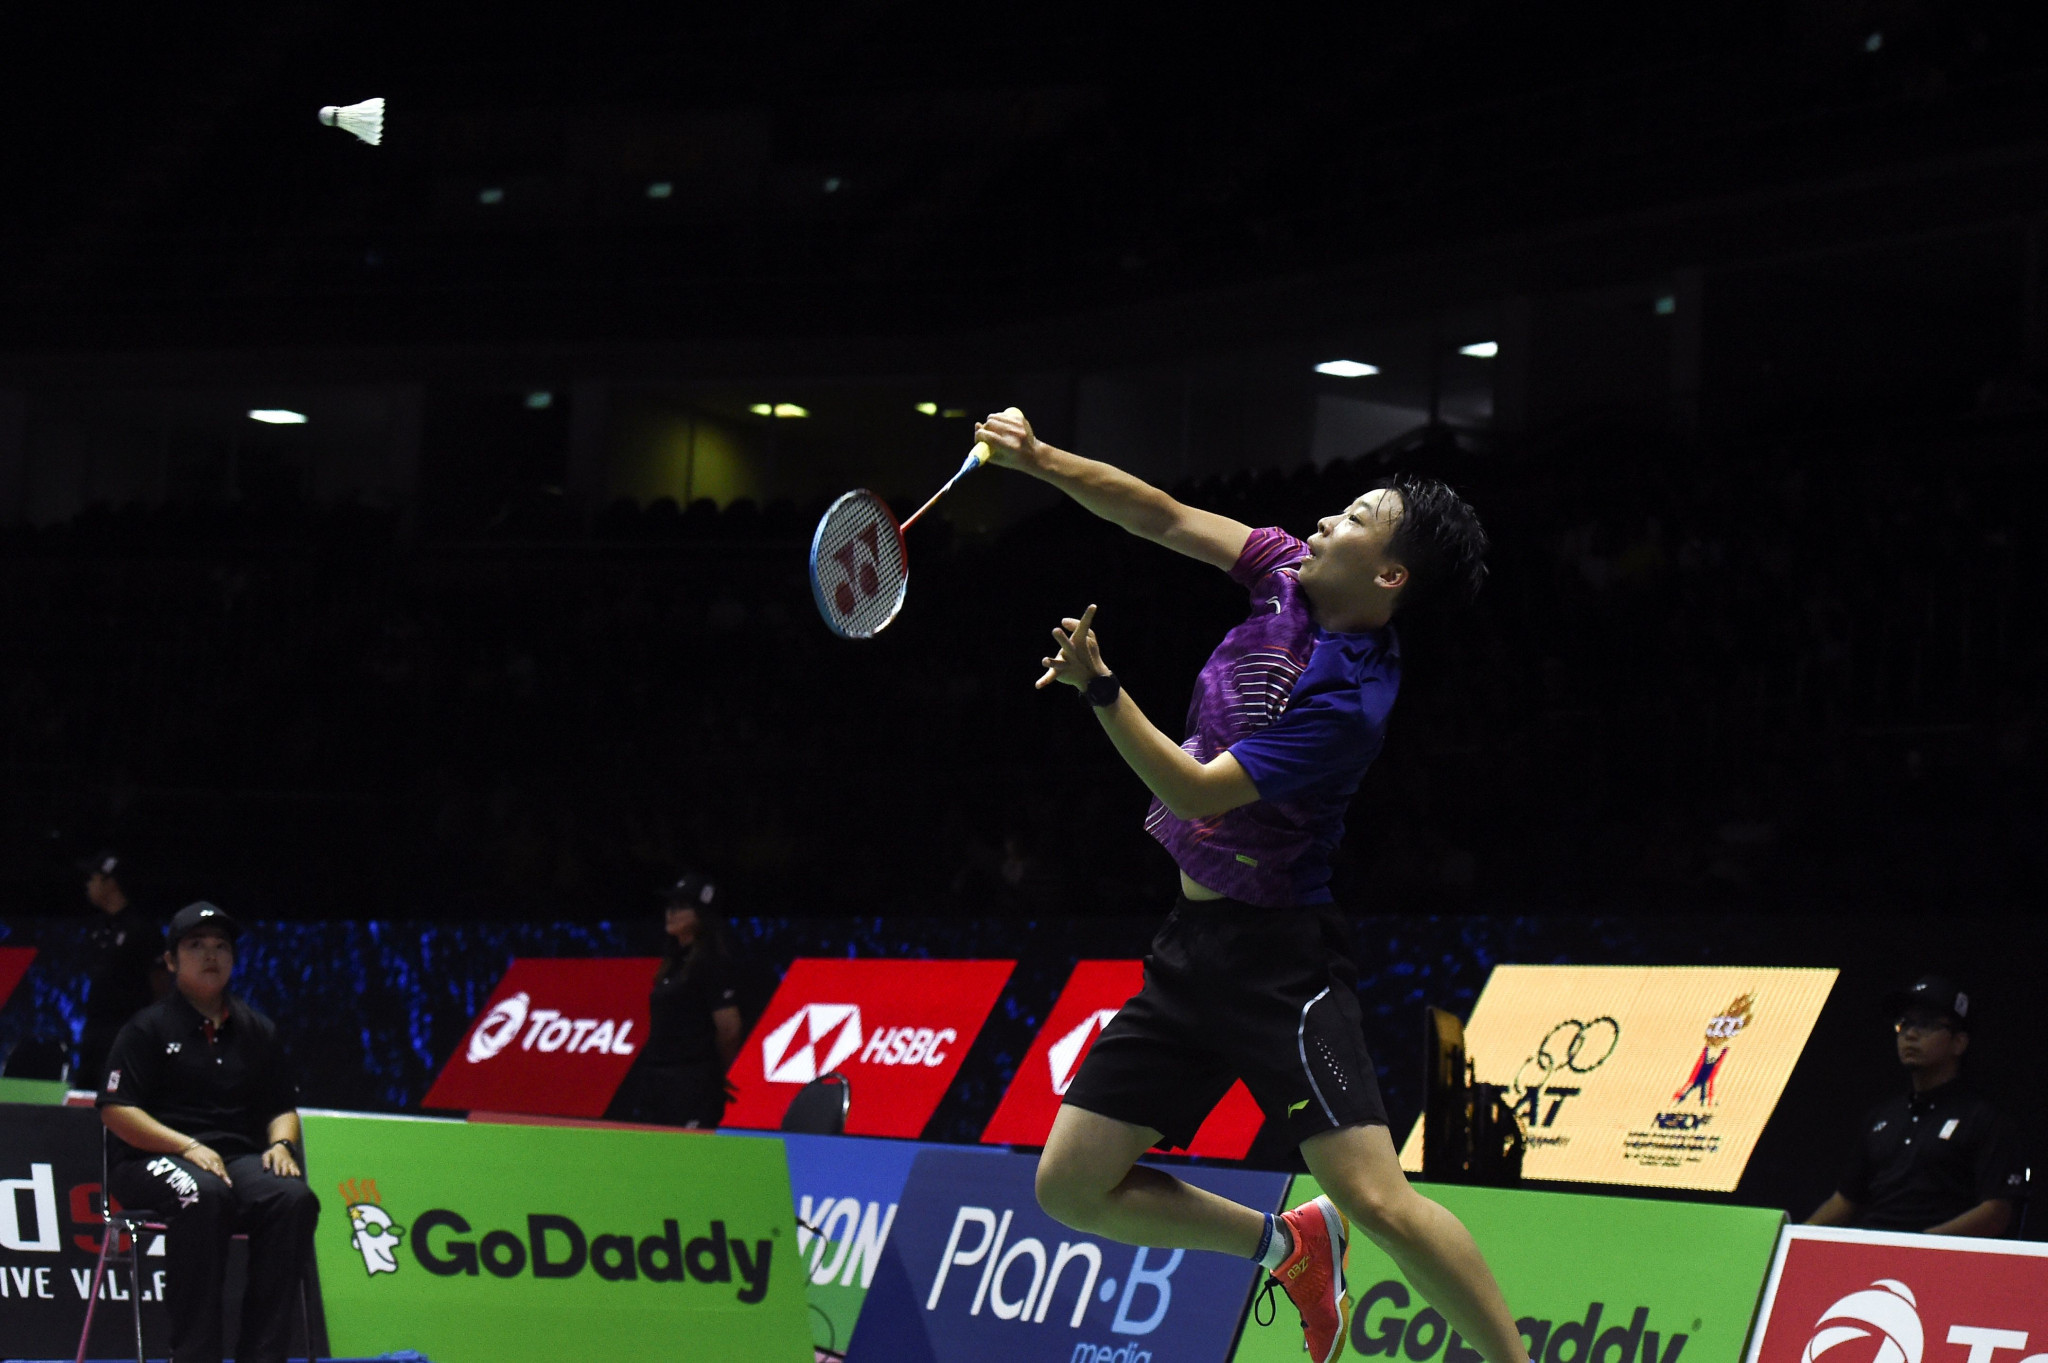 Chen to defend title at Oceania Badminton Championships in Ballarat